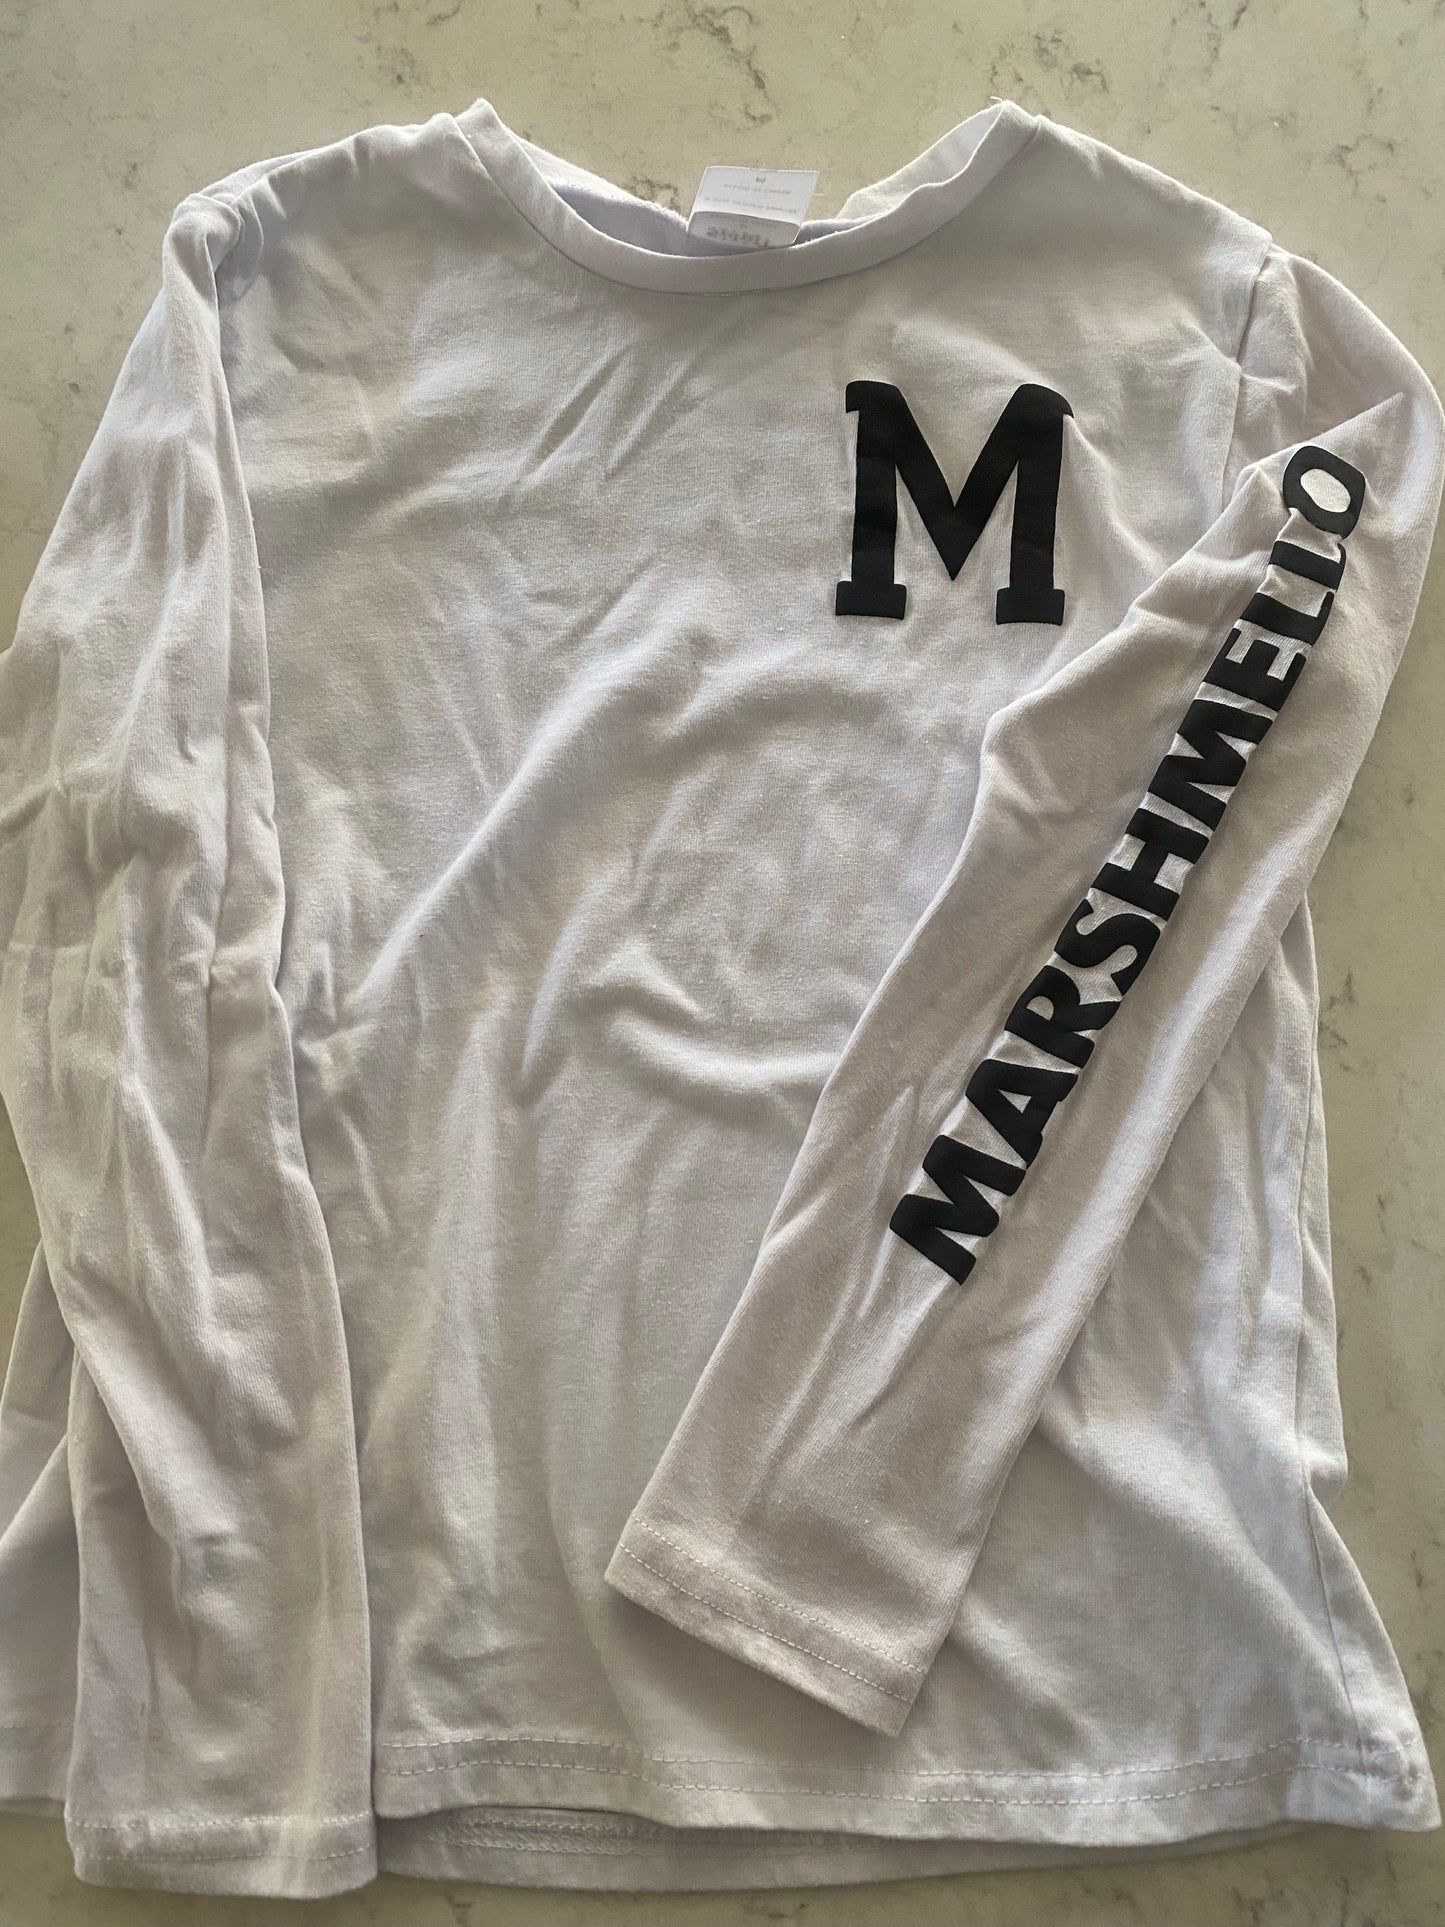 Marshmallow white long sleeve shirt size Med PPU Mariemont